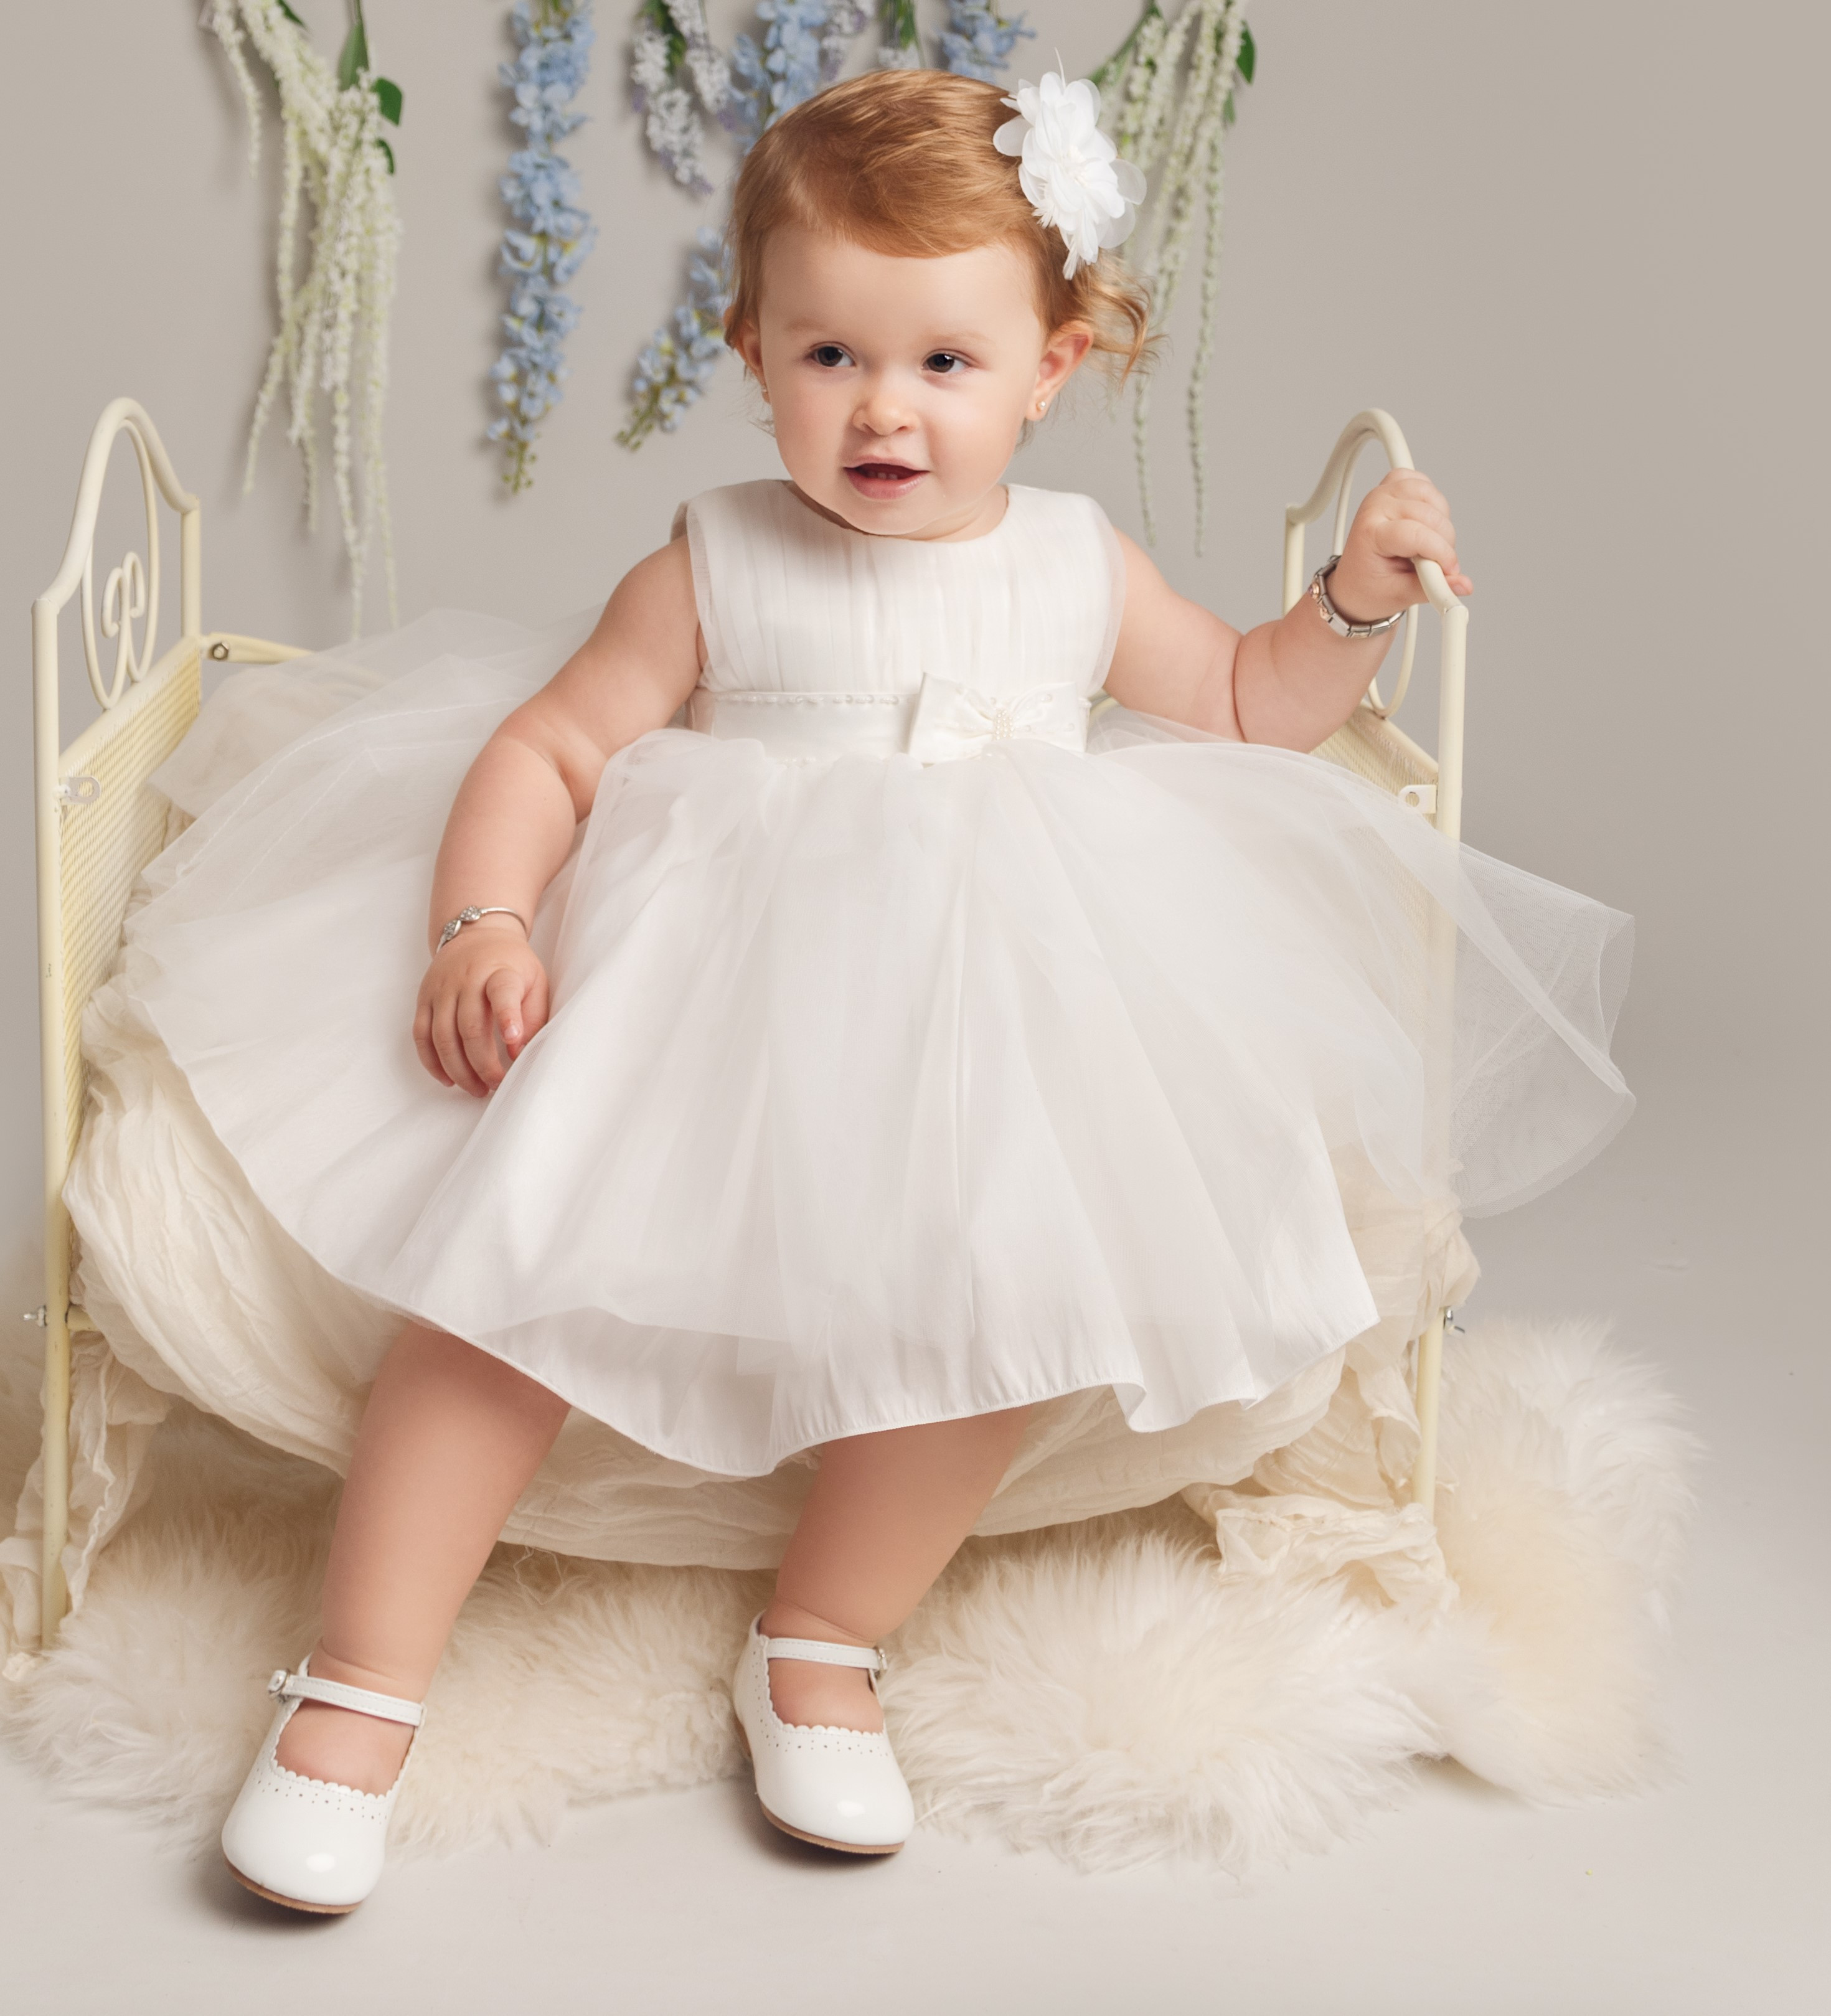 Baby Dresses For Special Occasions